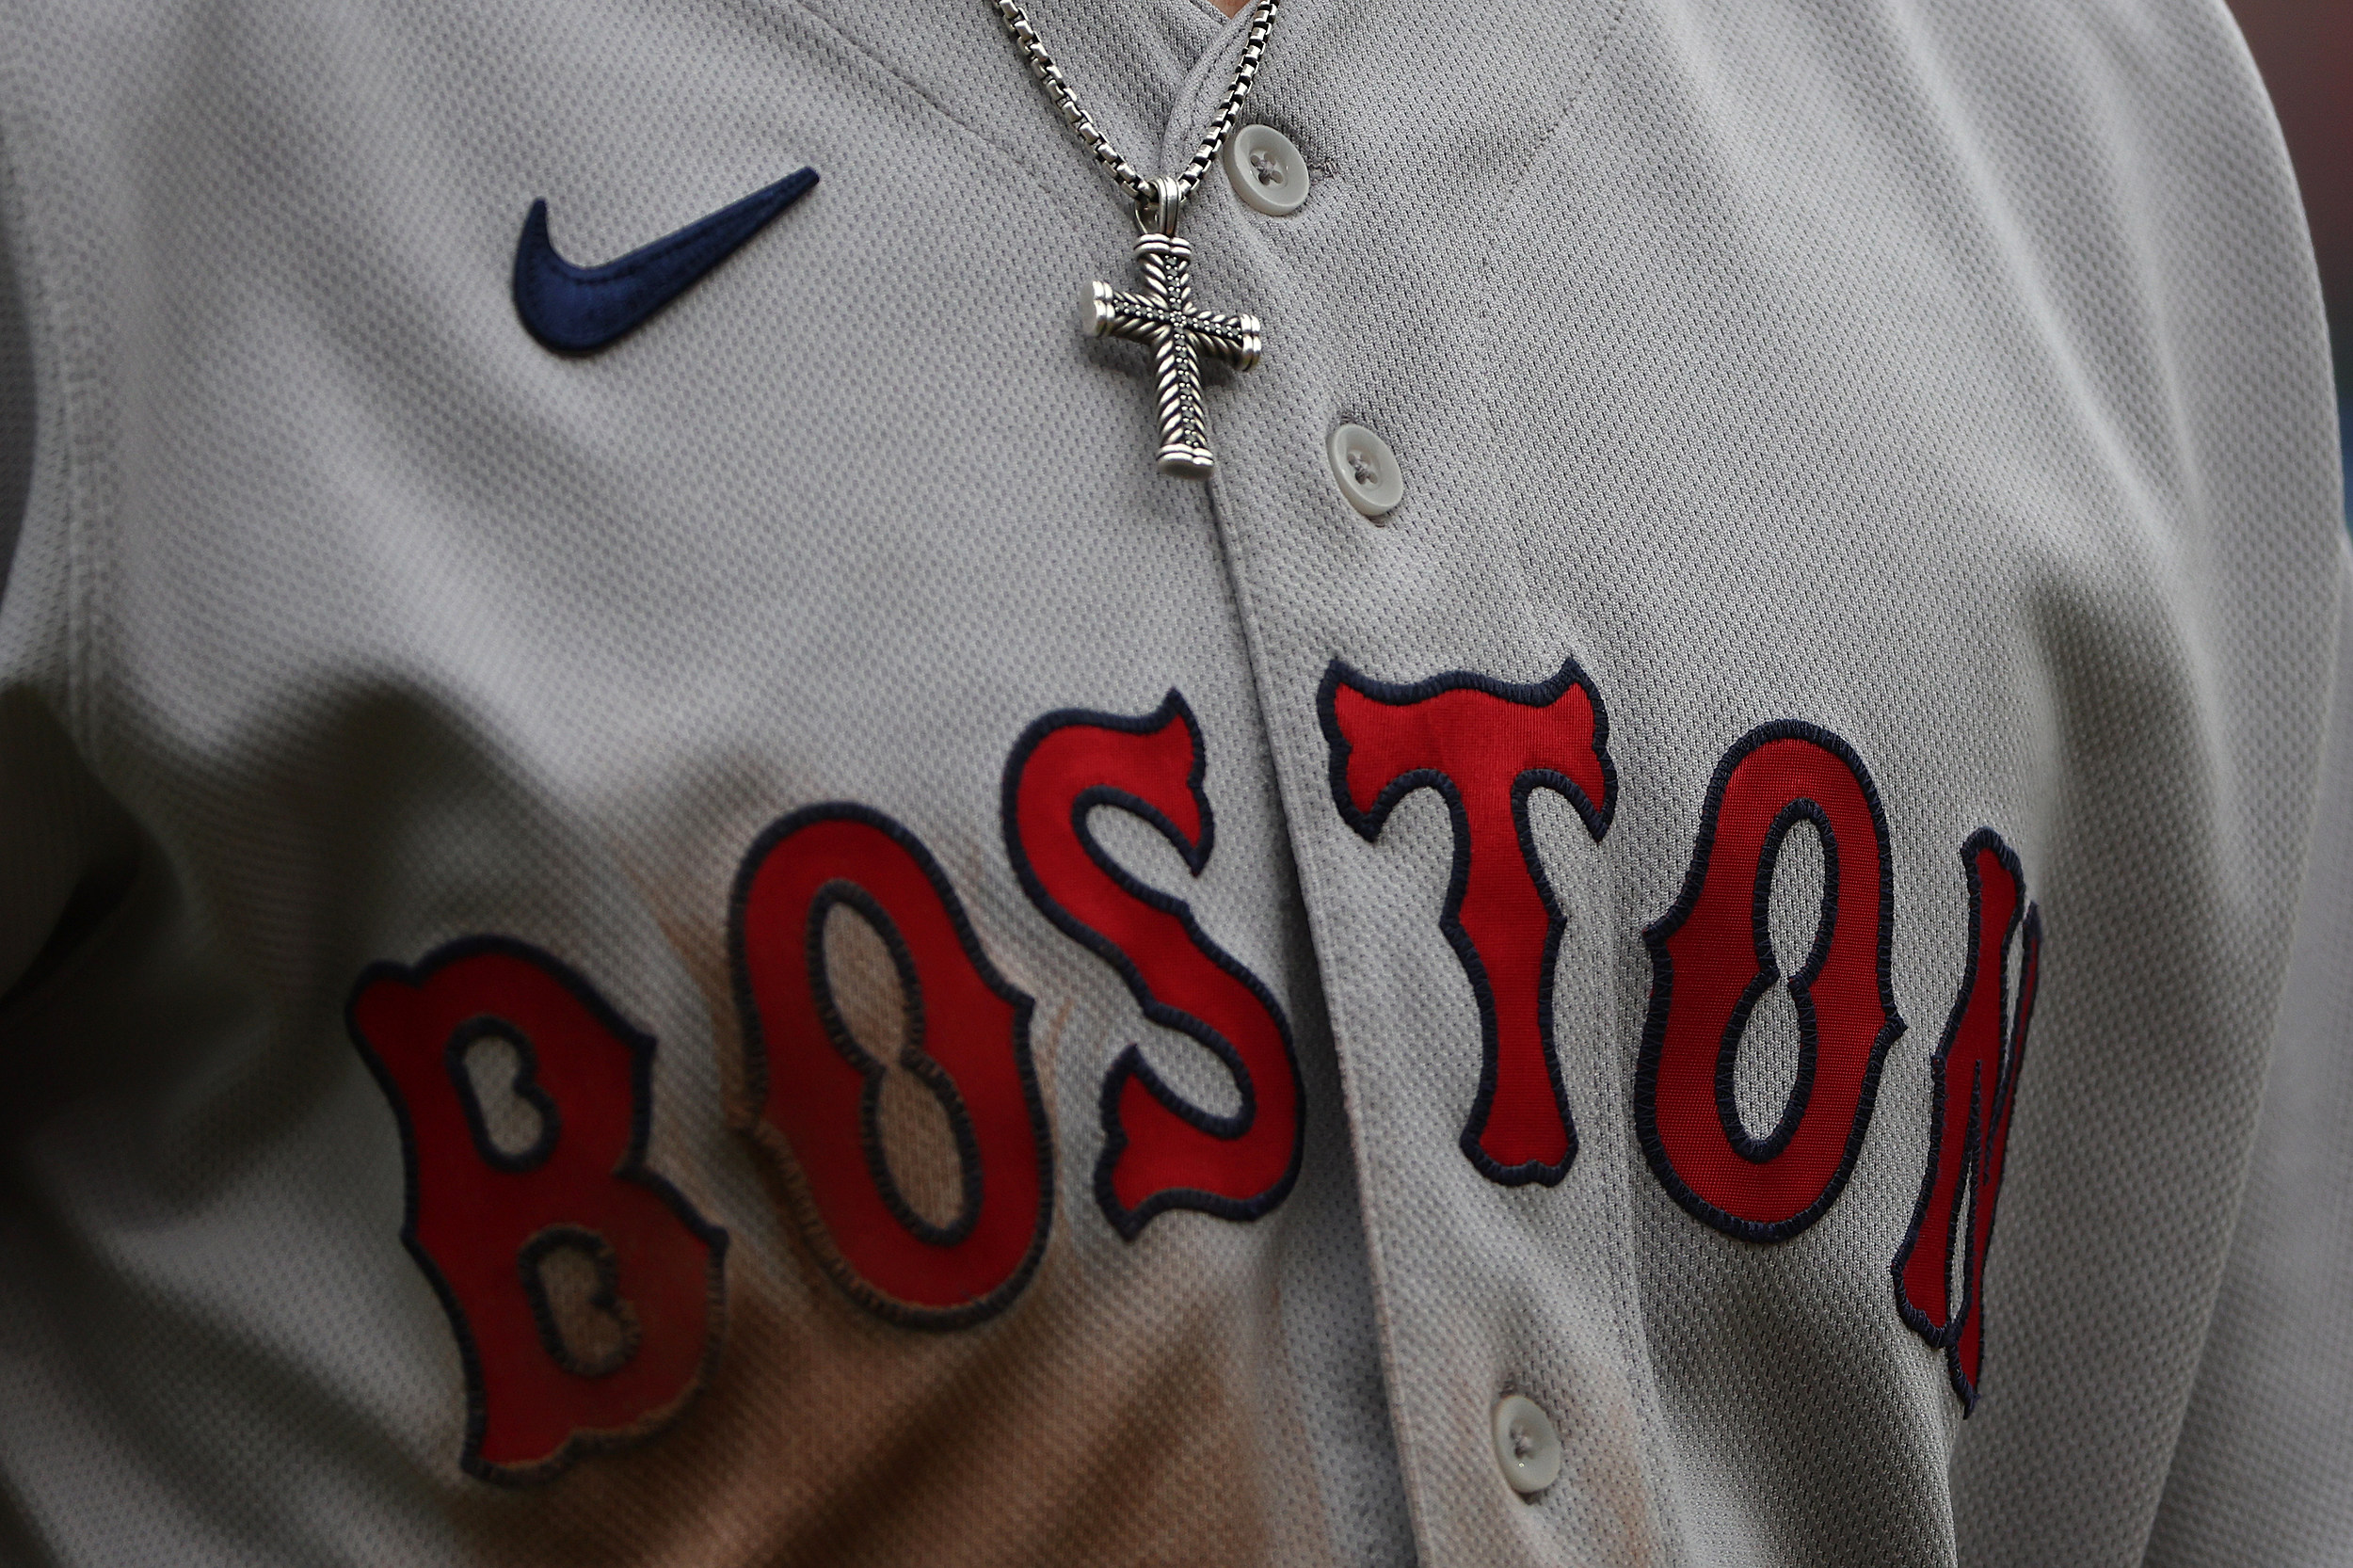 The Red Sox Attempt to Trademark the Word 'Boston'?